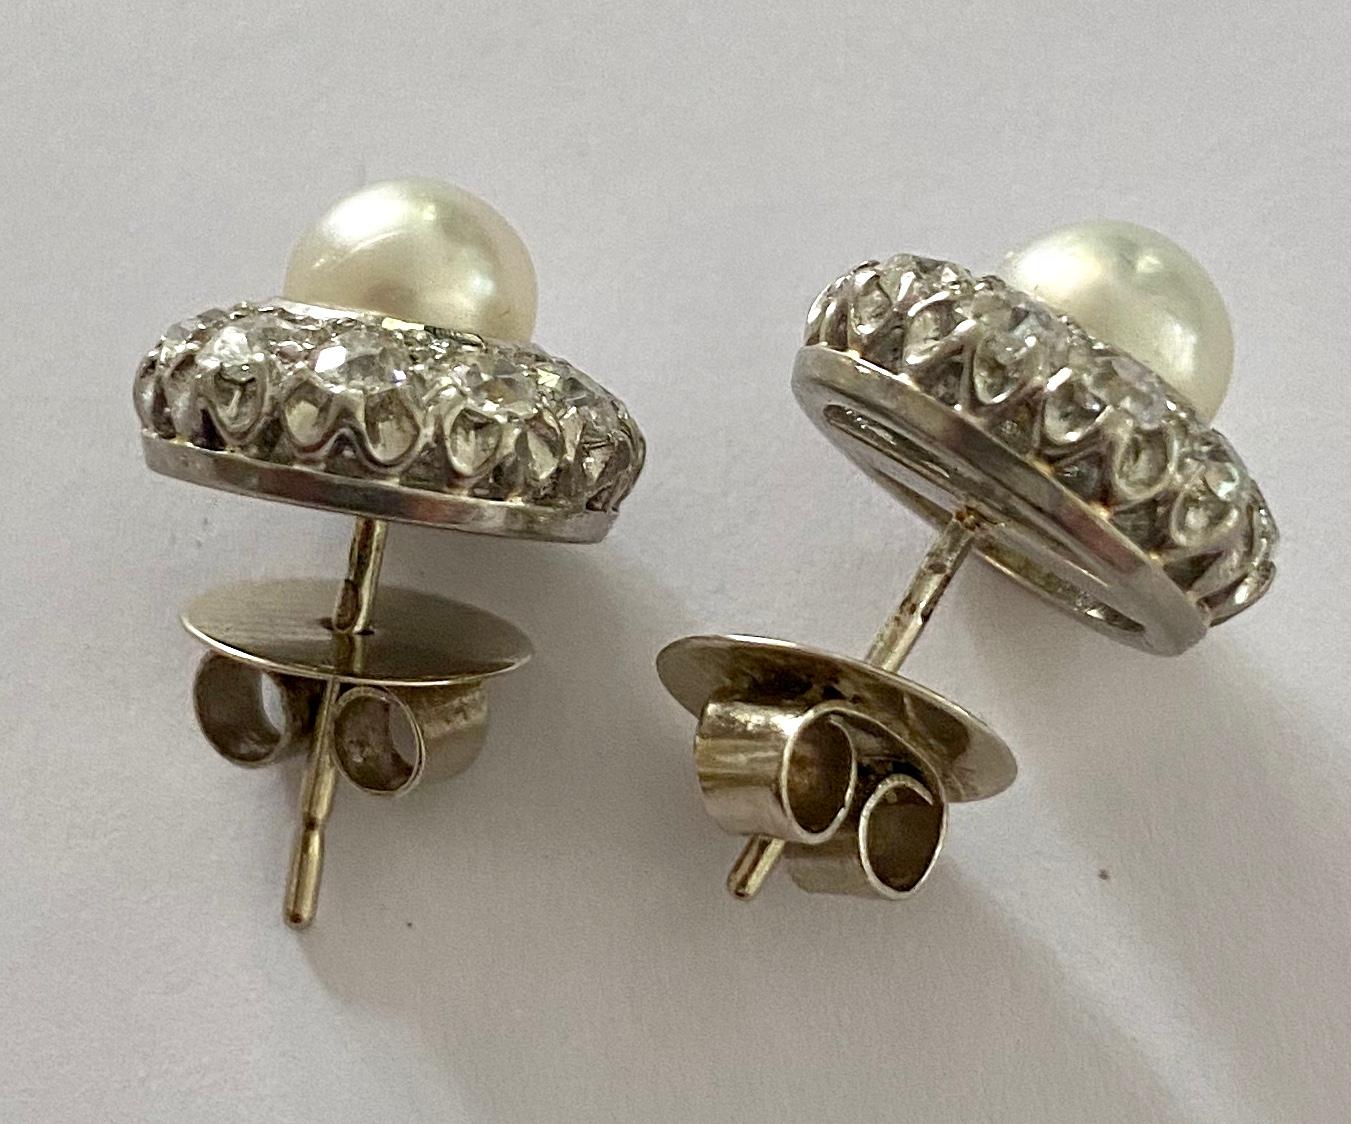 Women's One '1' Pair of 14 Karat White Gold Ear Rings, Round Cult Pearls and 20 Diamonds